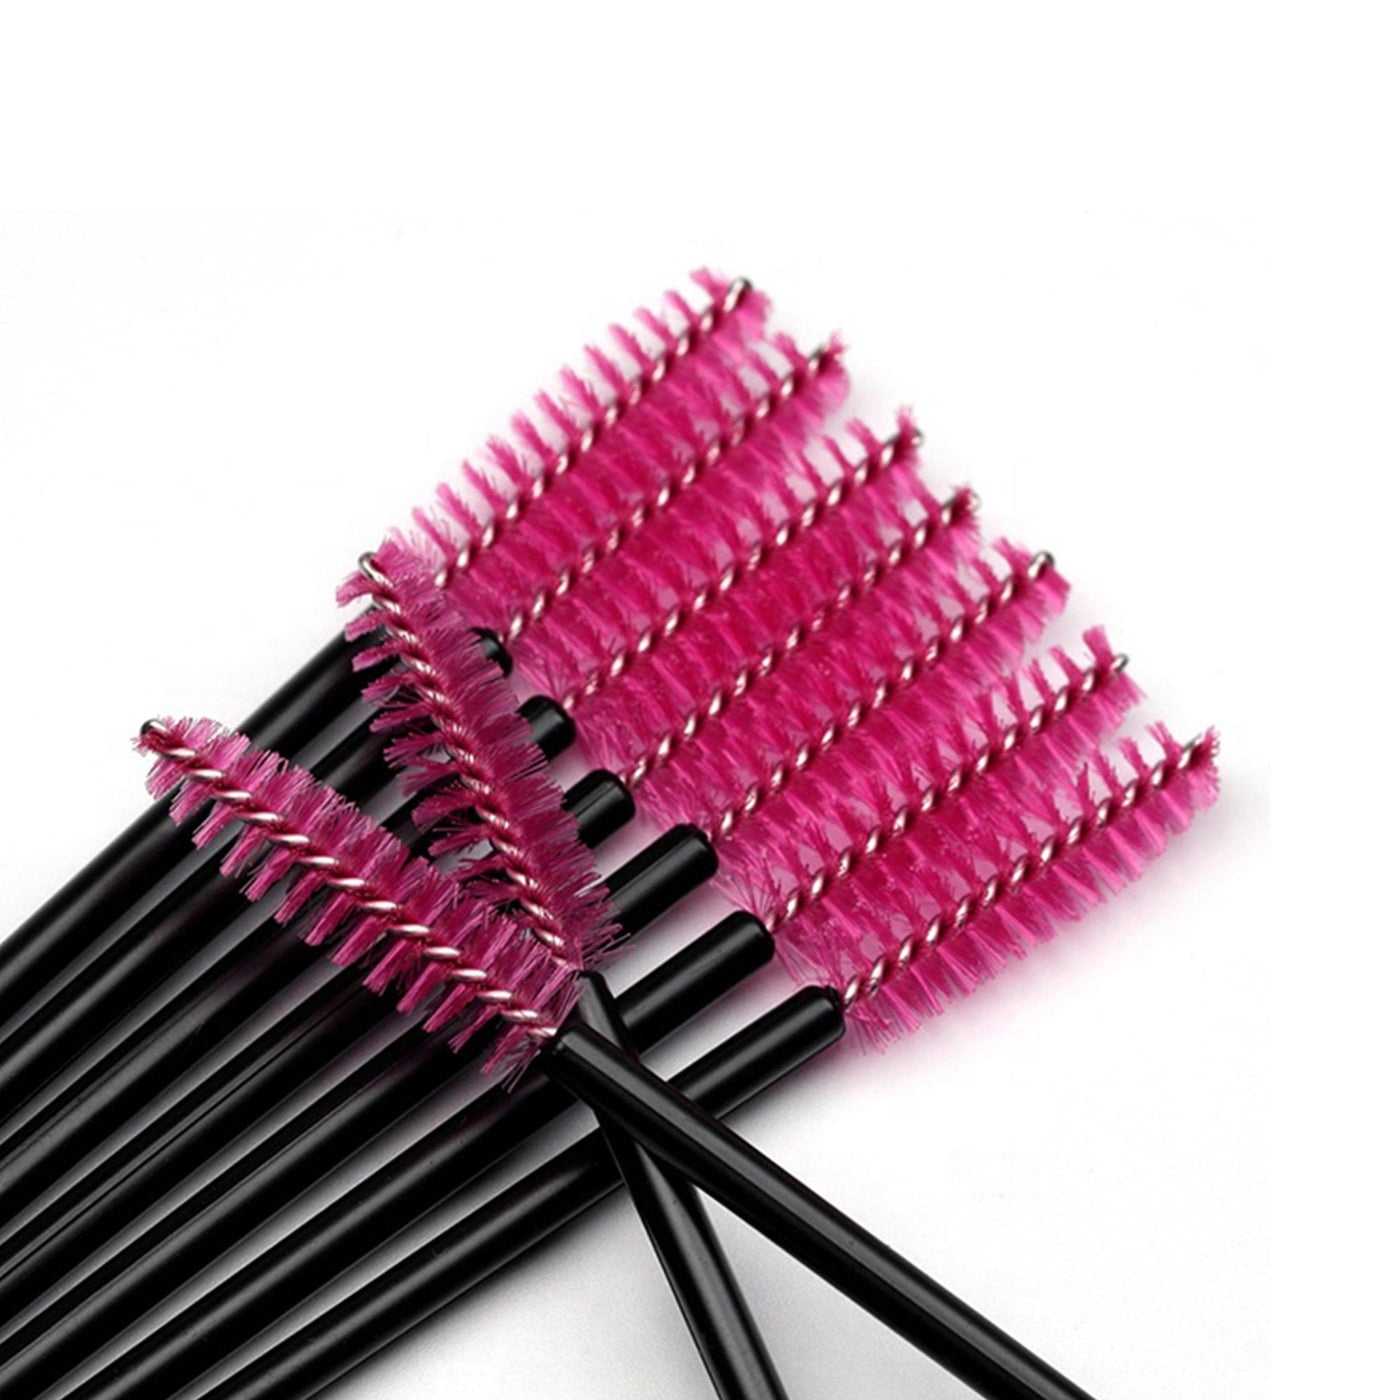 Pink and Black Silicone Soft Mascara Wands - 50 pcs - The London Brow Company